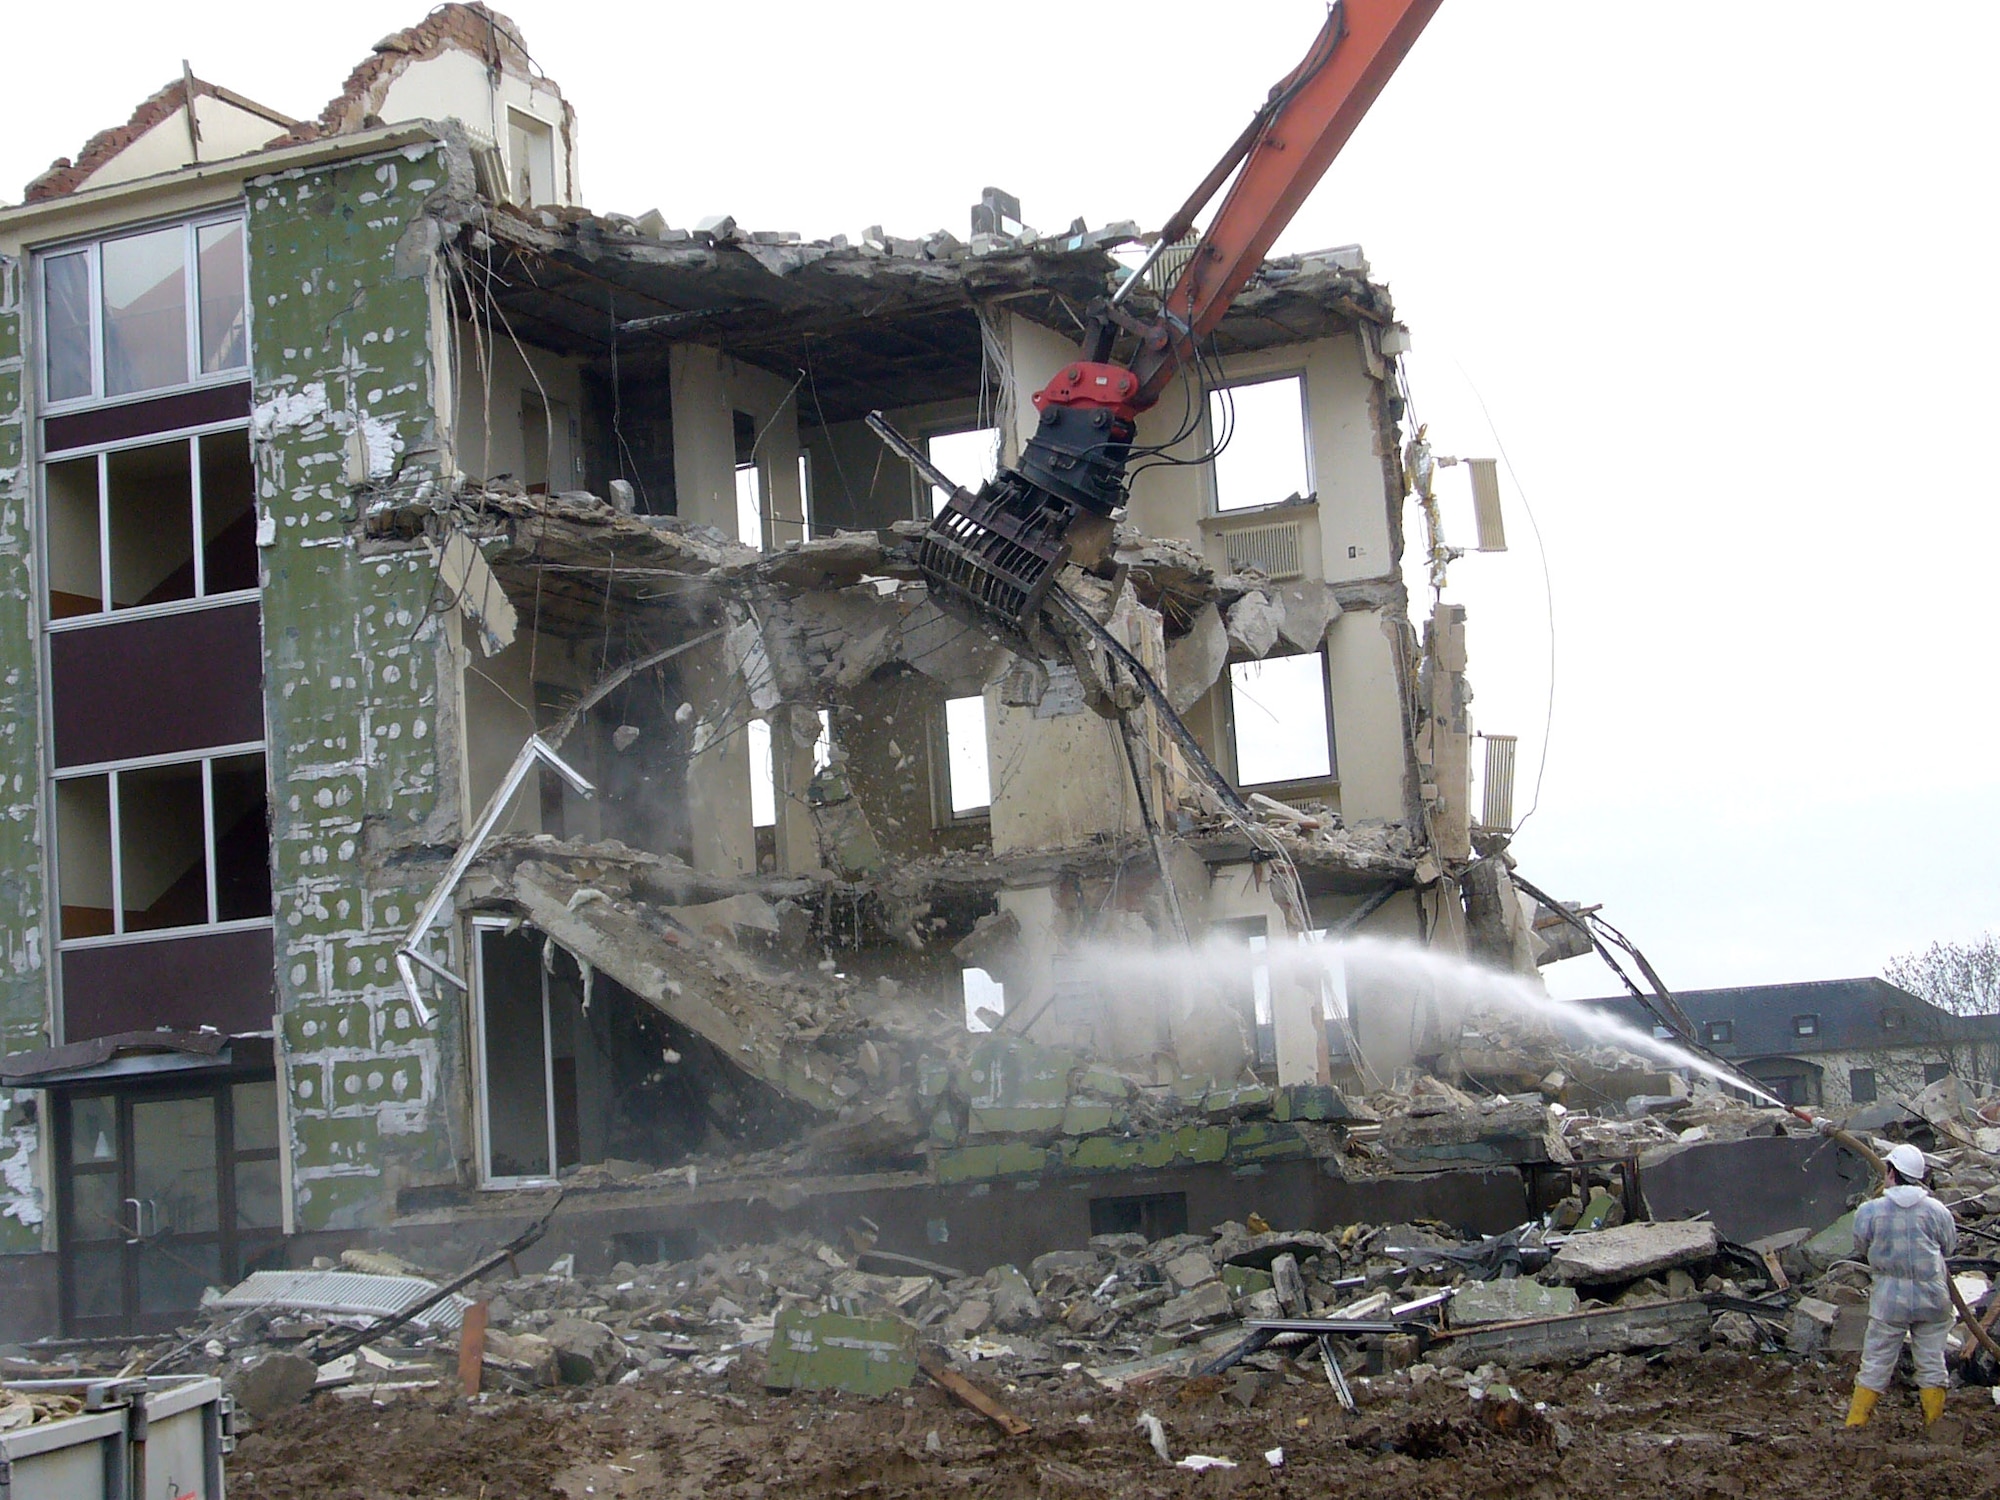 The demolition of old stairwell housing began in November at Spangdahlem Air Base, Germany. The Air Force is spending $83 million to demolish the old stairwell housing and building 139 new homes at Spanghadhlem AB. (U.S. Air Force photo/Rainer Schneider)
